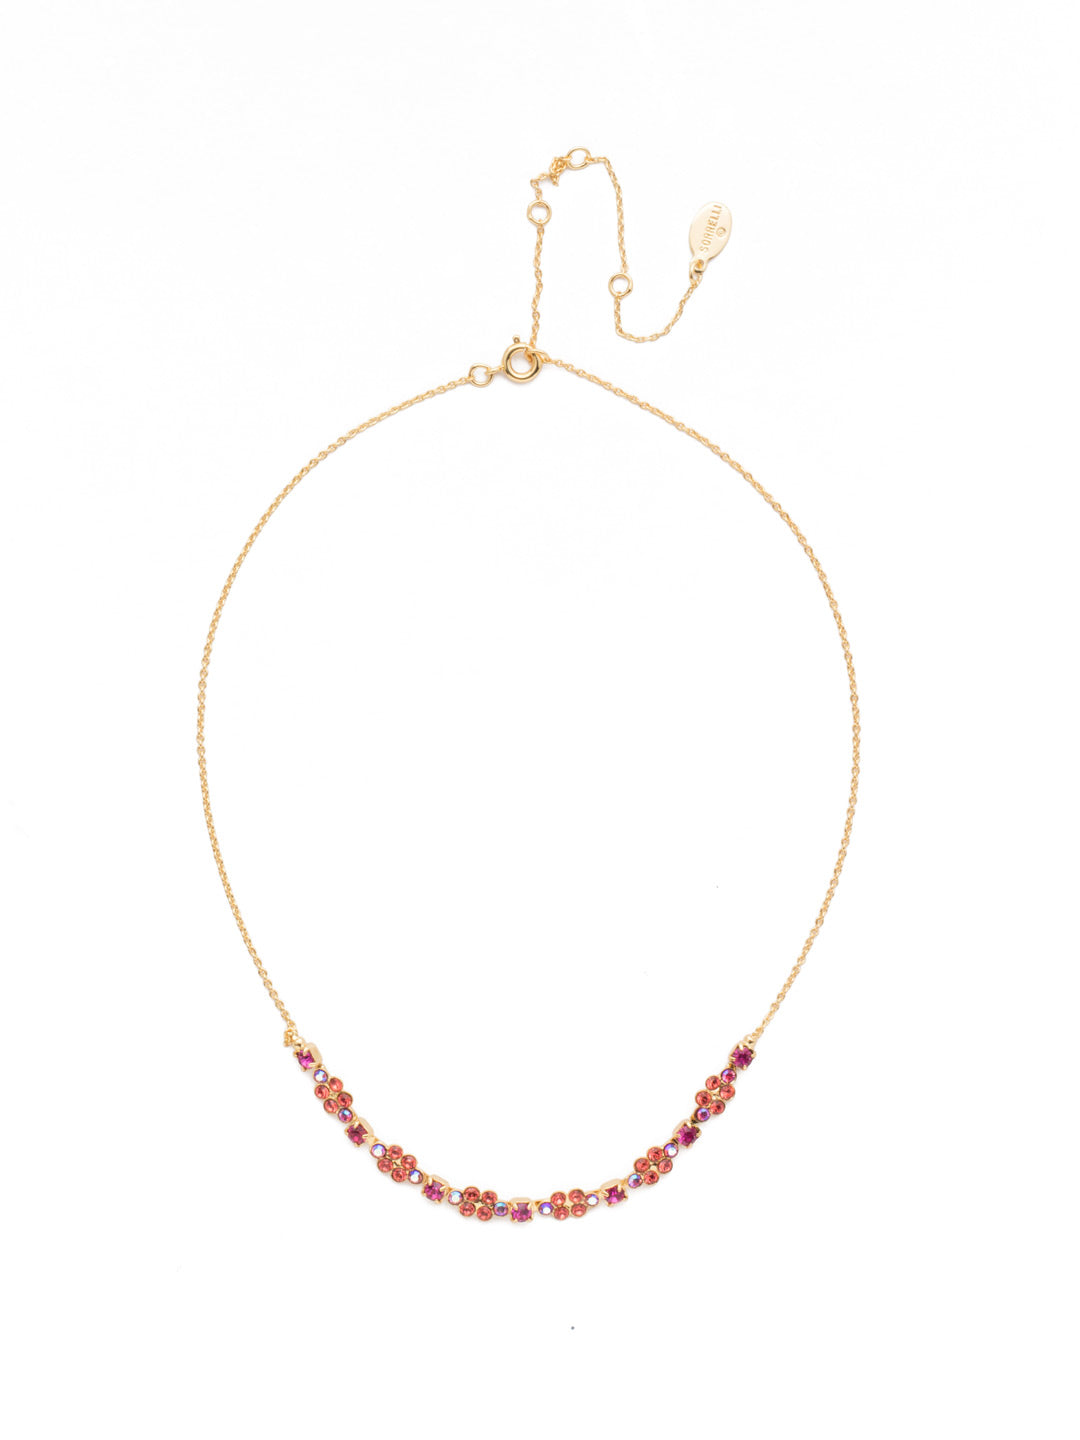 Mavis Tennis Necklace - NEN7BGBGA - <p>The Mavis Tennis Necklace adds a sparkling floral feel to your outfit, and it's always in season. From Sorrelli's Begonia collection in our Bright Gold-tone finish.</p>